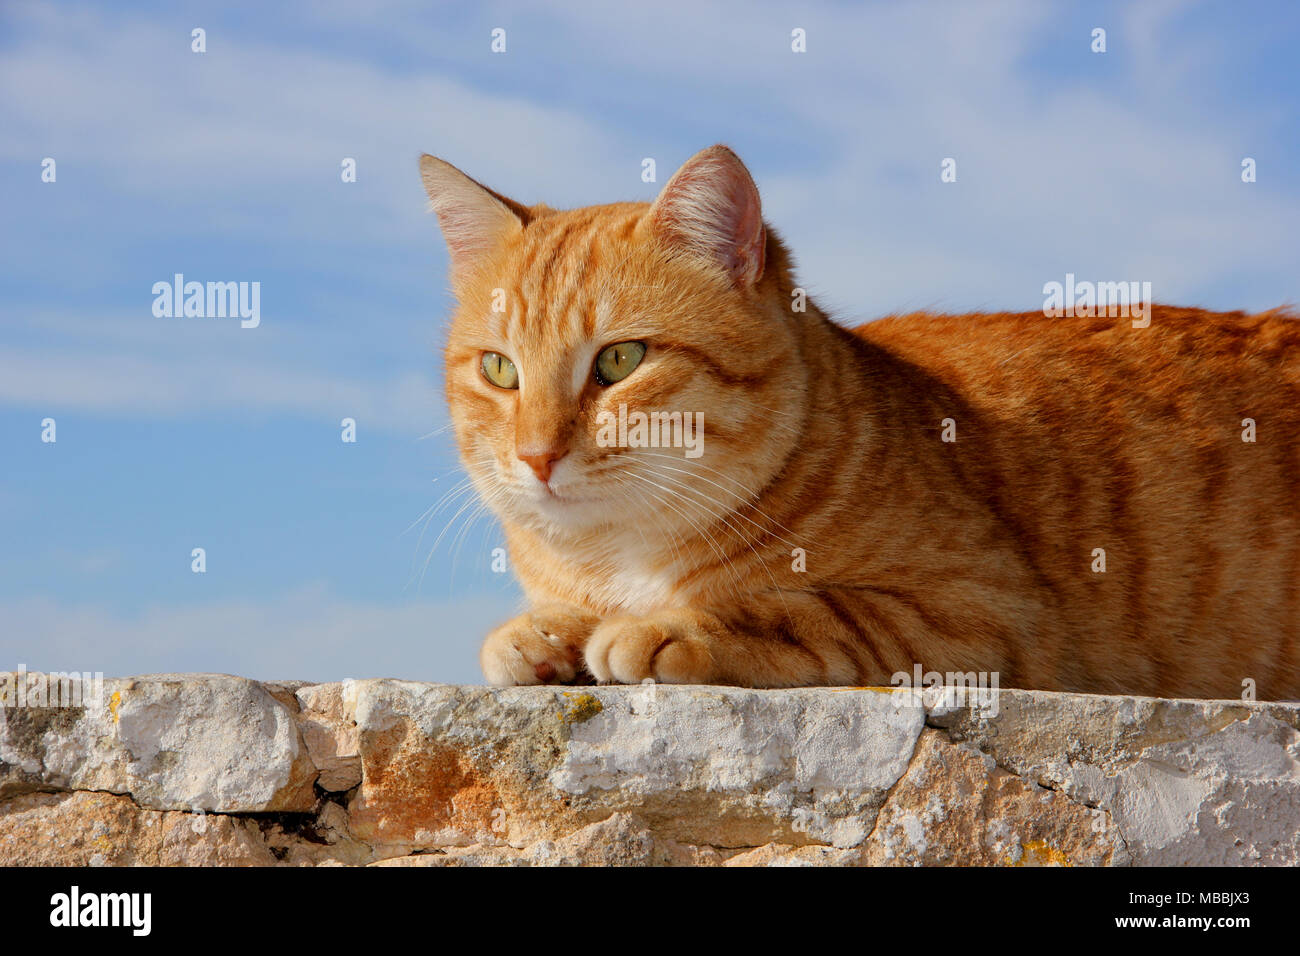 Chat domestique, gingembre, red tabby, le mensonge Banque D'Images